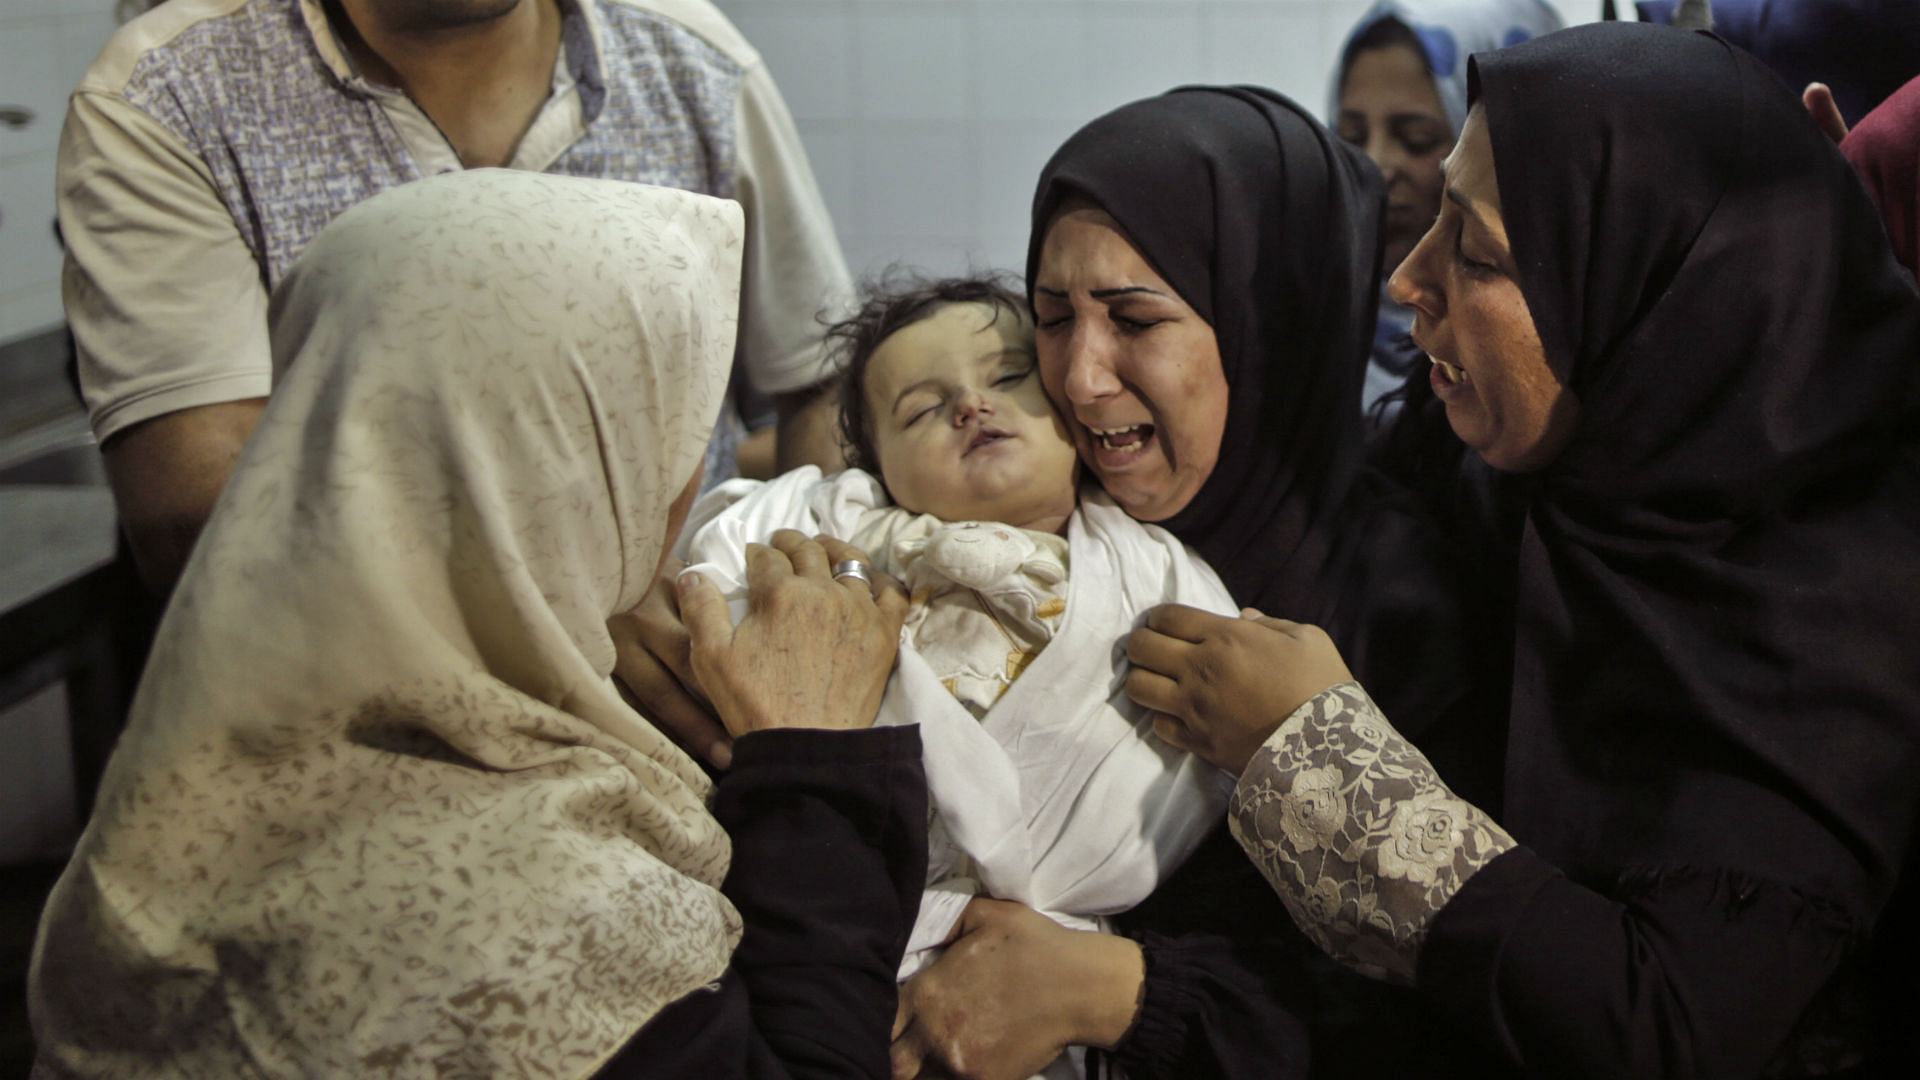 Eight month old Leila al-Ghandour died after inhaling tear gas at the Israeli border